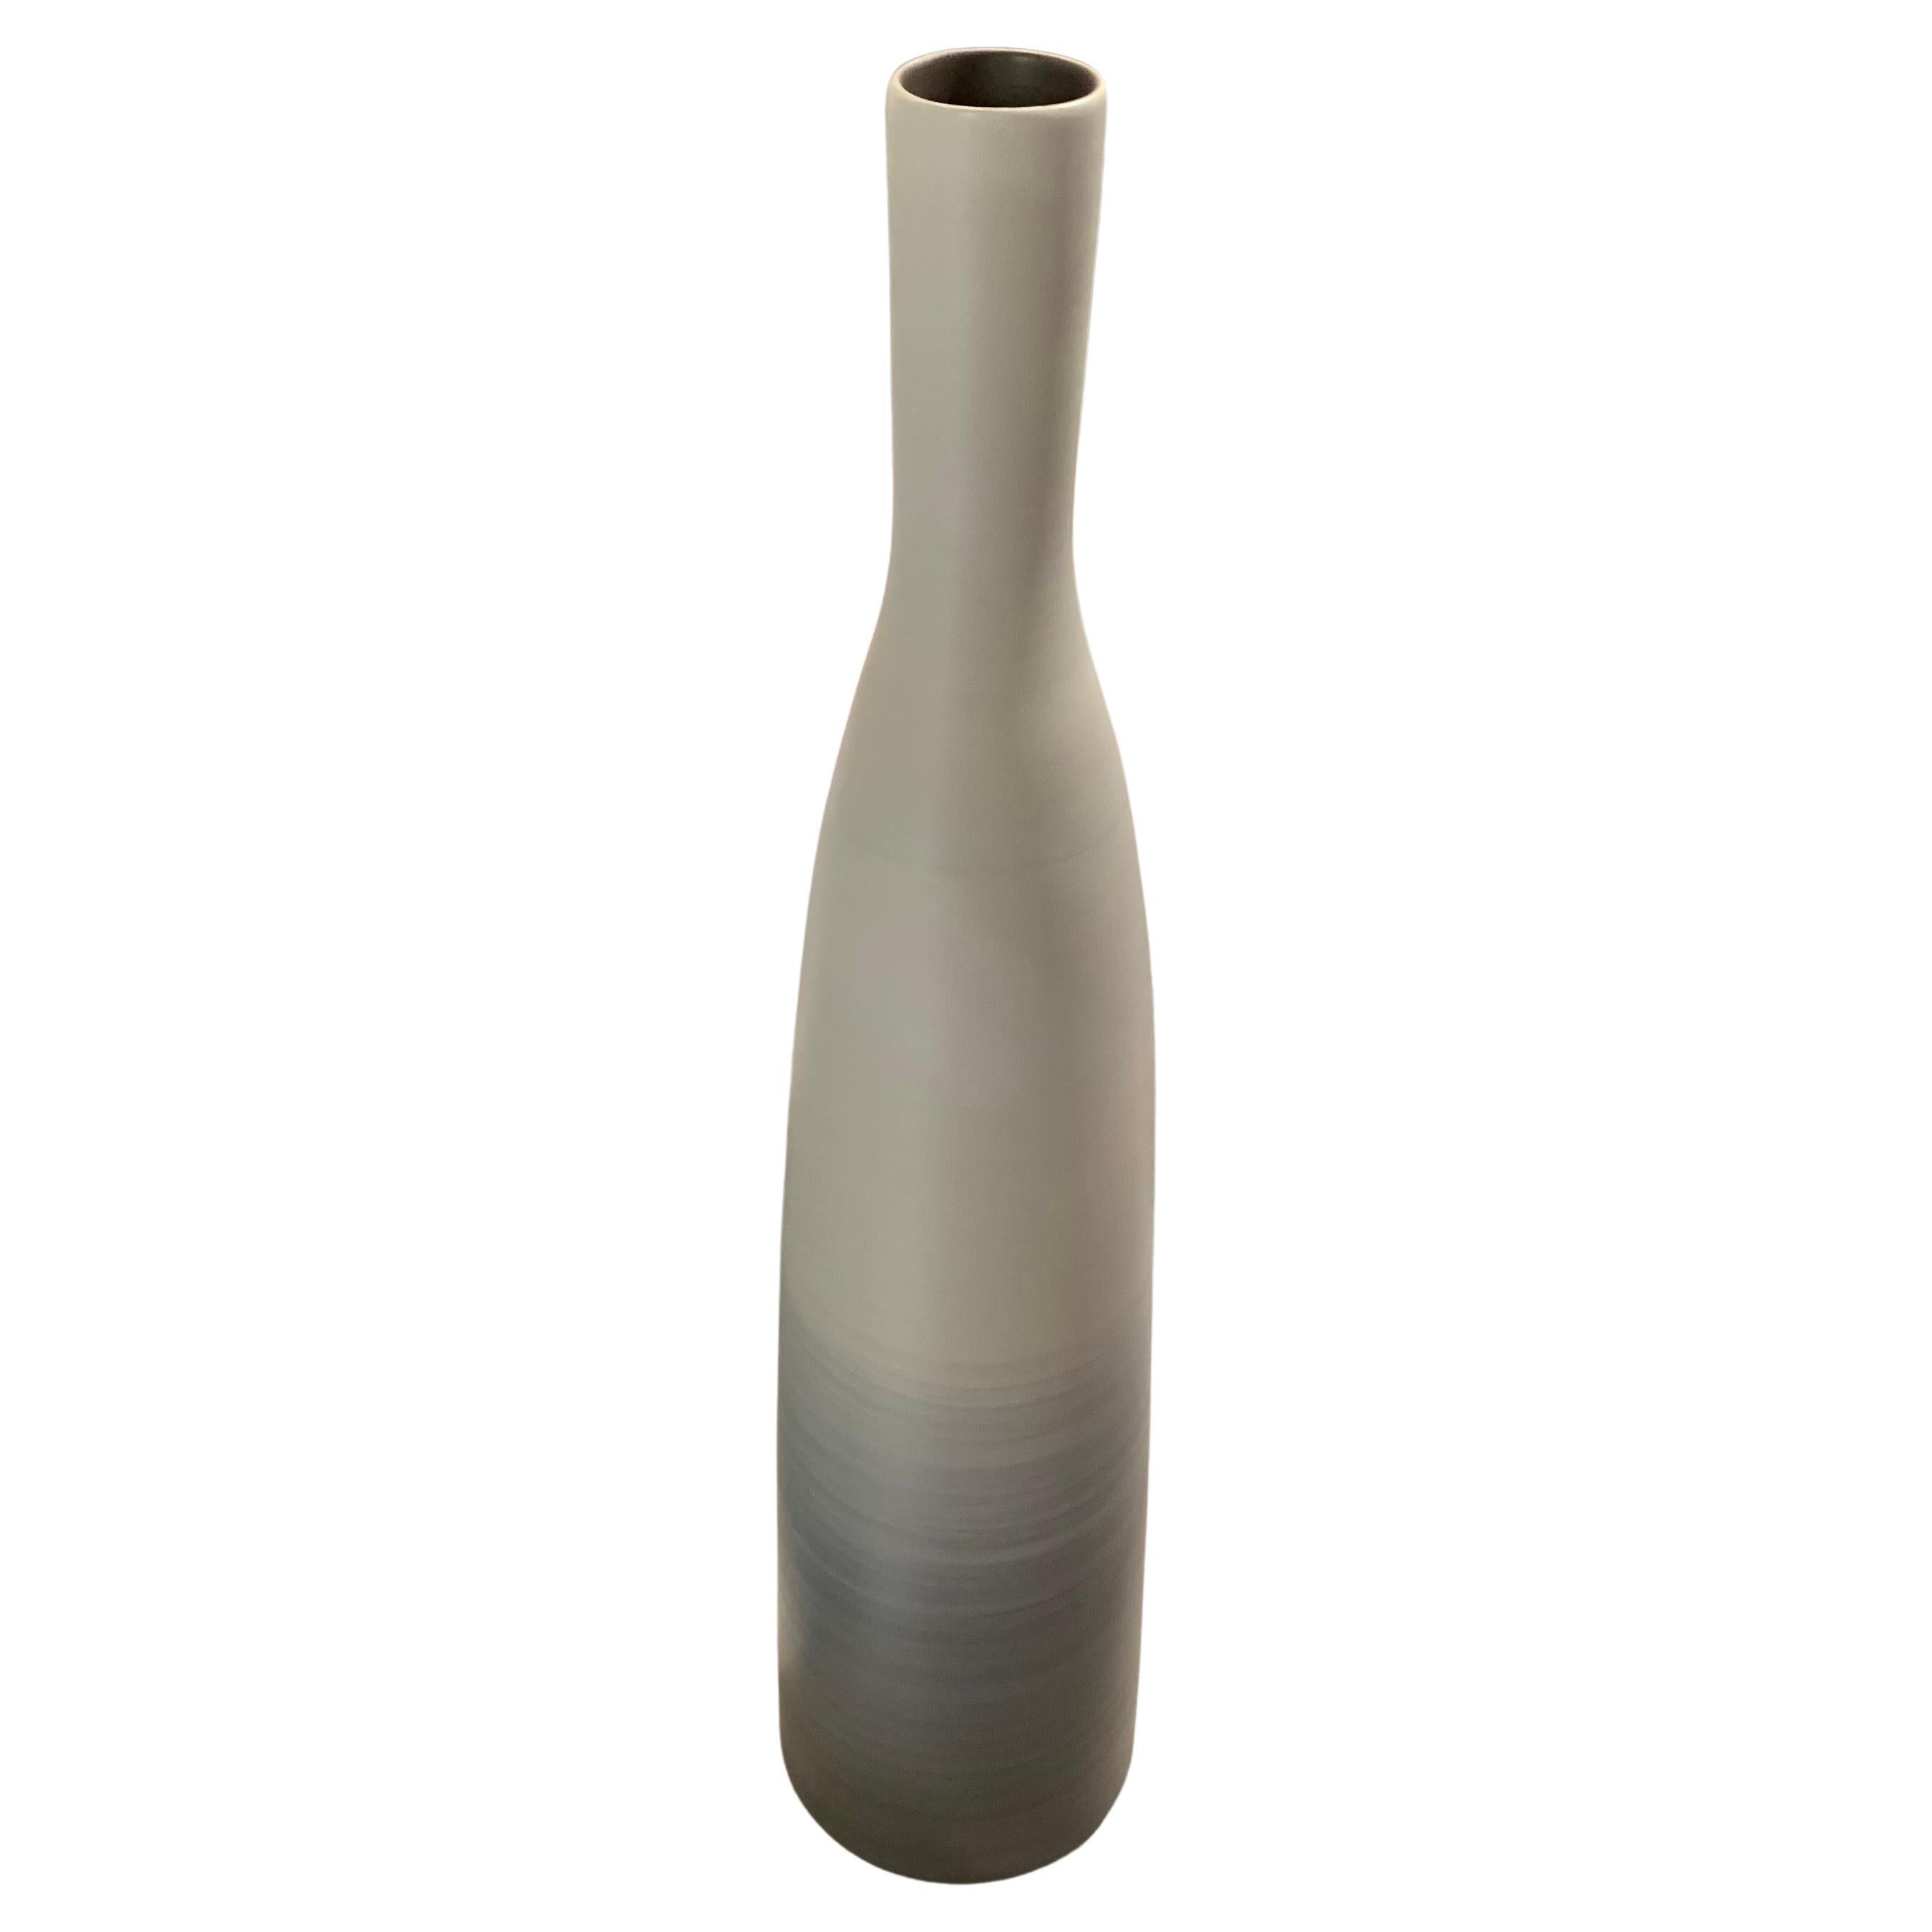 Contemporary Italian tall thin vase with decorative ombre glaze.
Shades of turquoise and grey at the bottom, ascending to solid pale taupe above.
Available in three sizes ( S6197 S6198 )
Together make an attractive presentation.